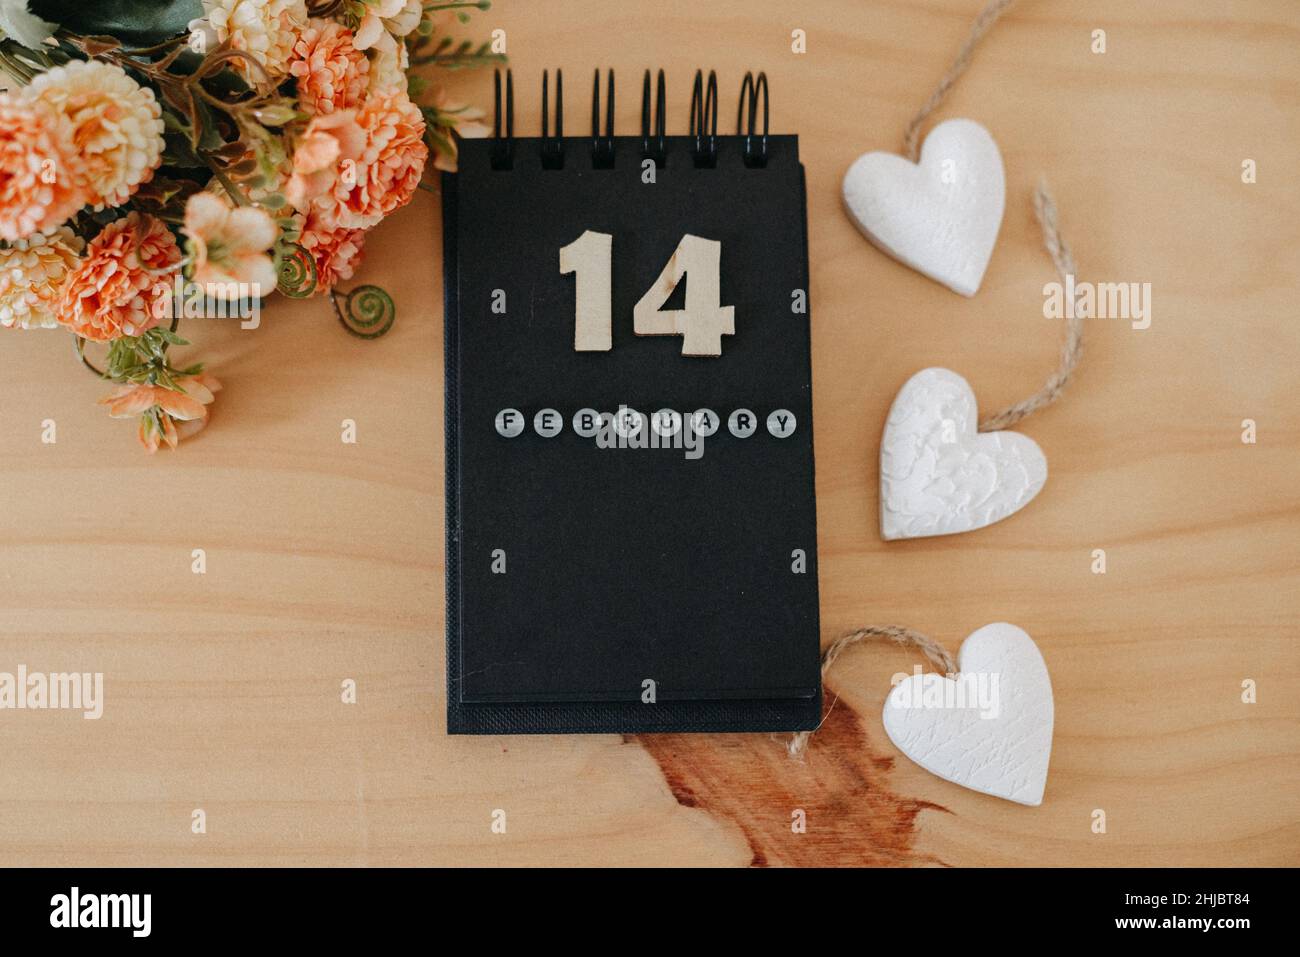 Wooden calendar on February 14 with roses and heart. Happy Valentines Day concept Stock Photo